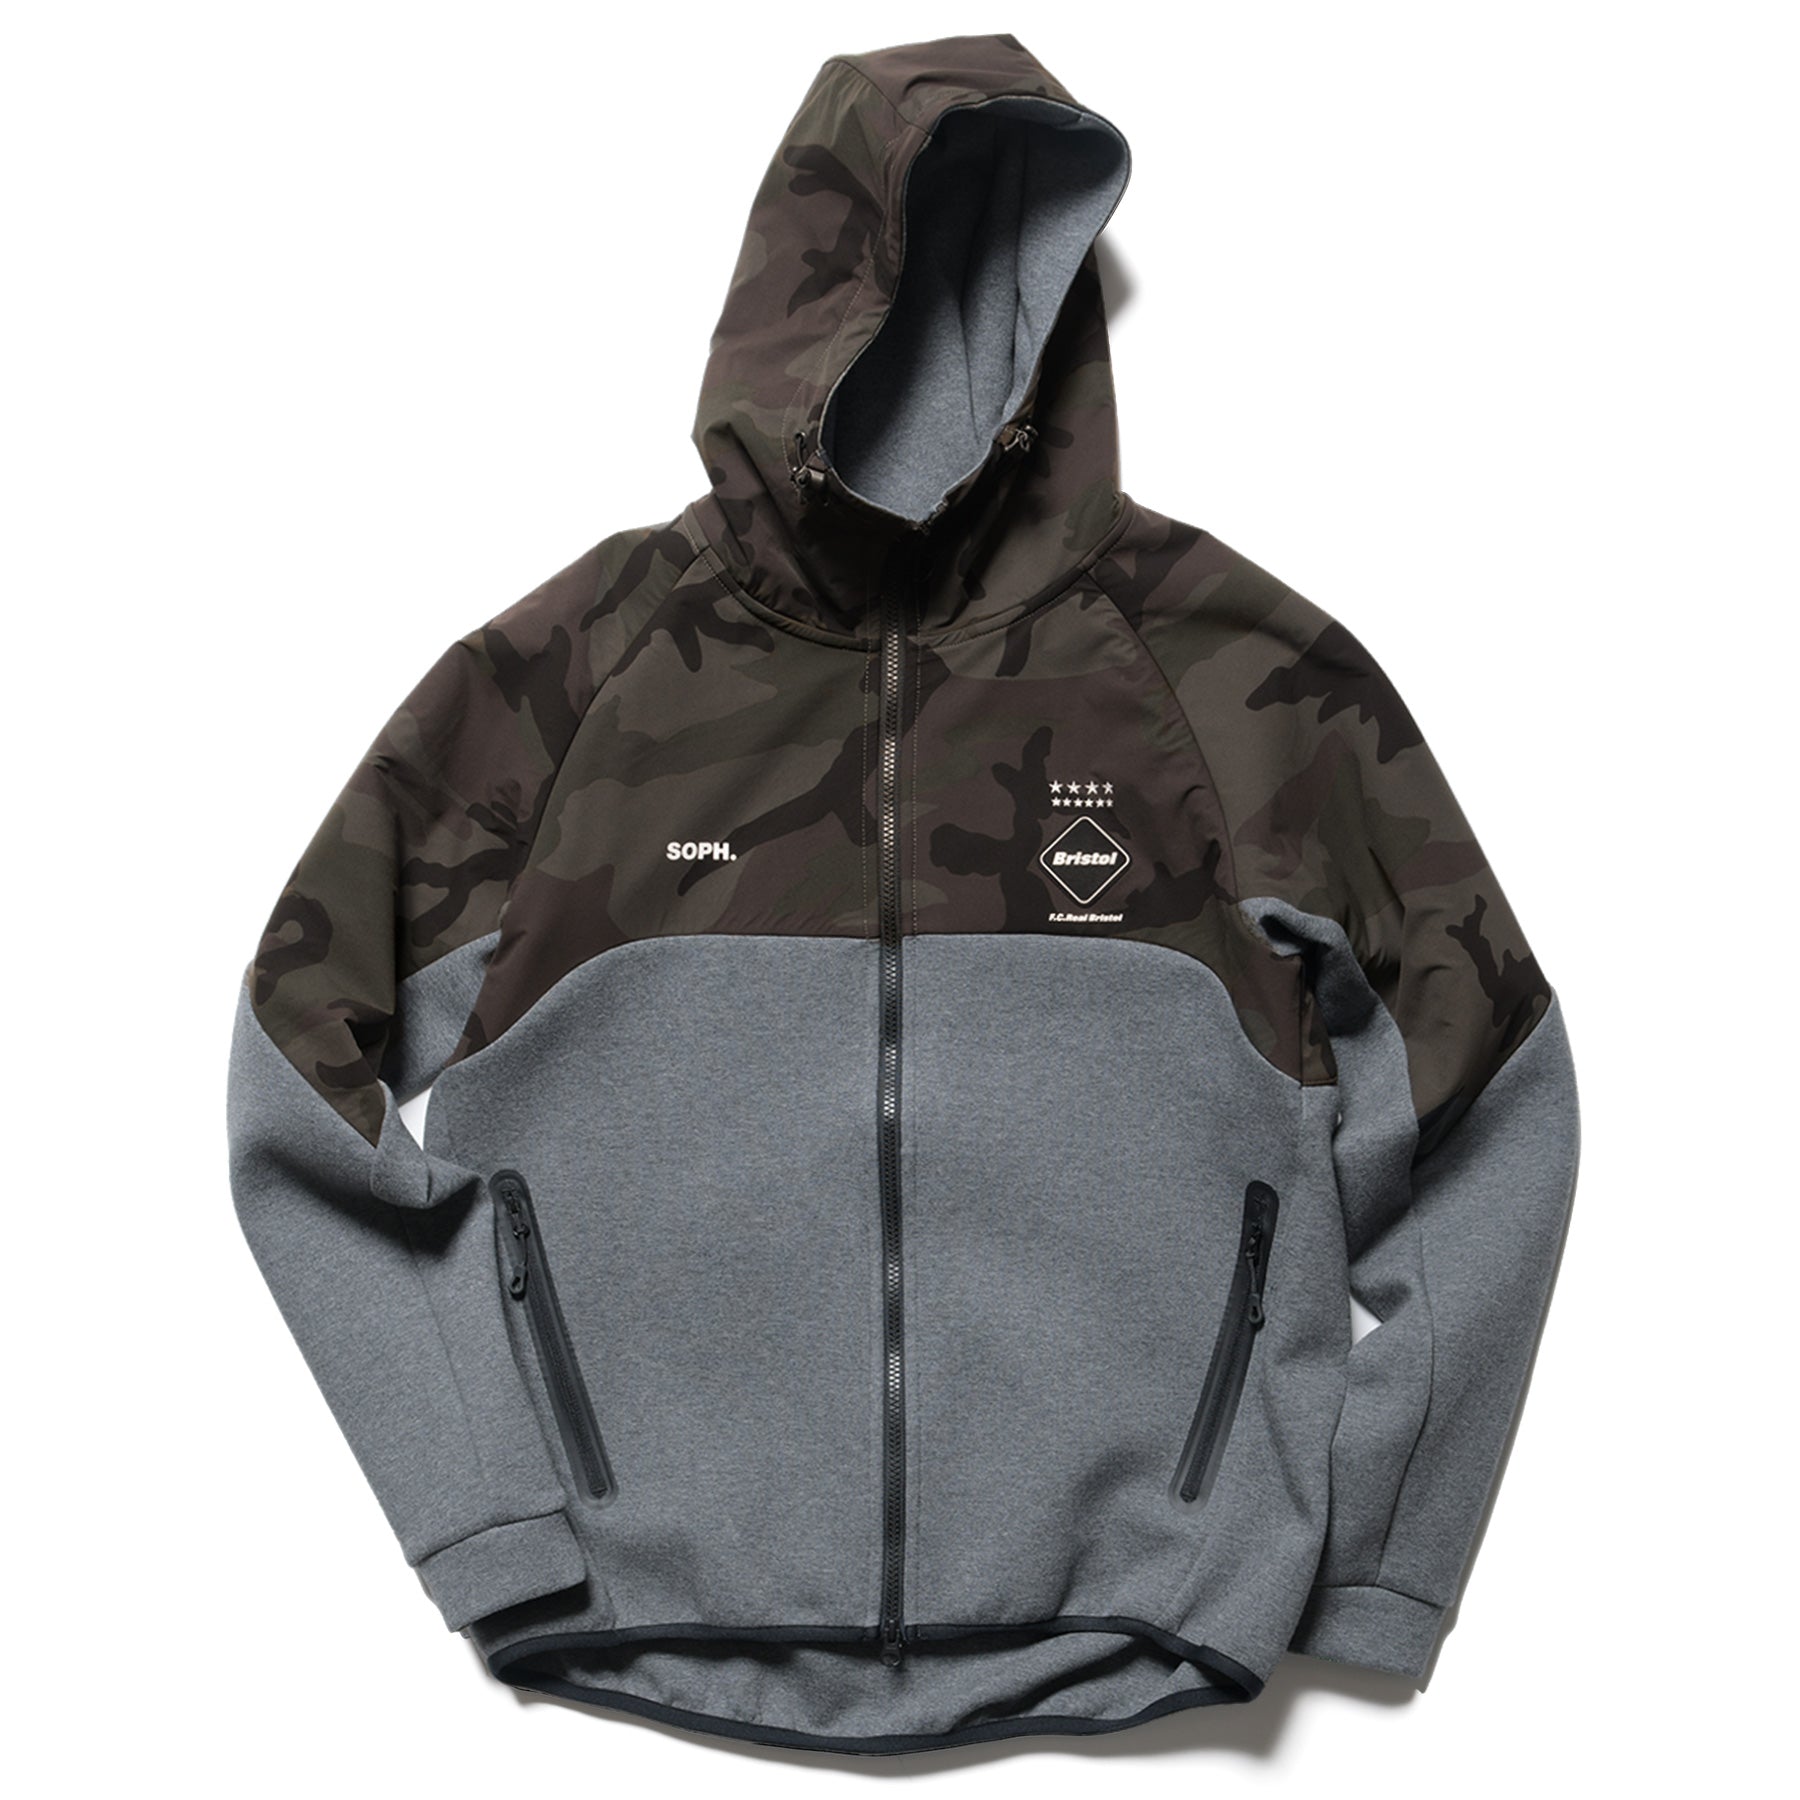 fcrb VENTILATION HOODIE(FCRB-212061) - パーカー